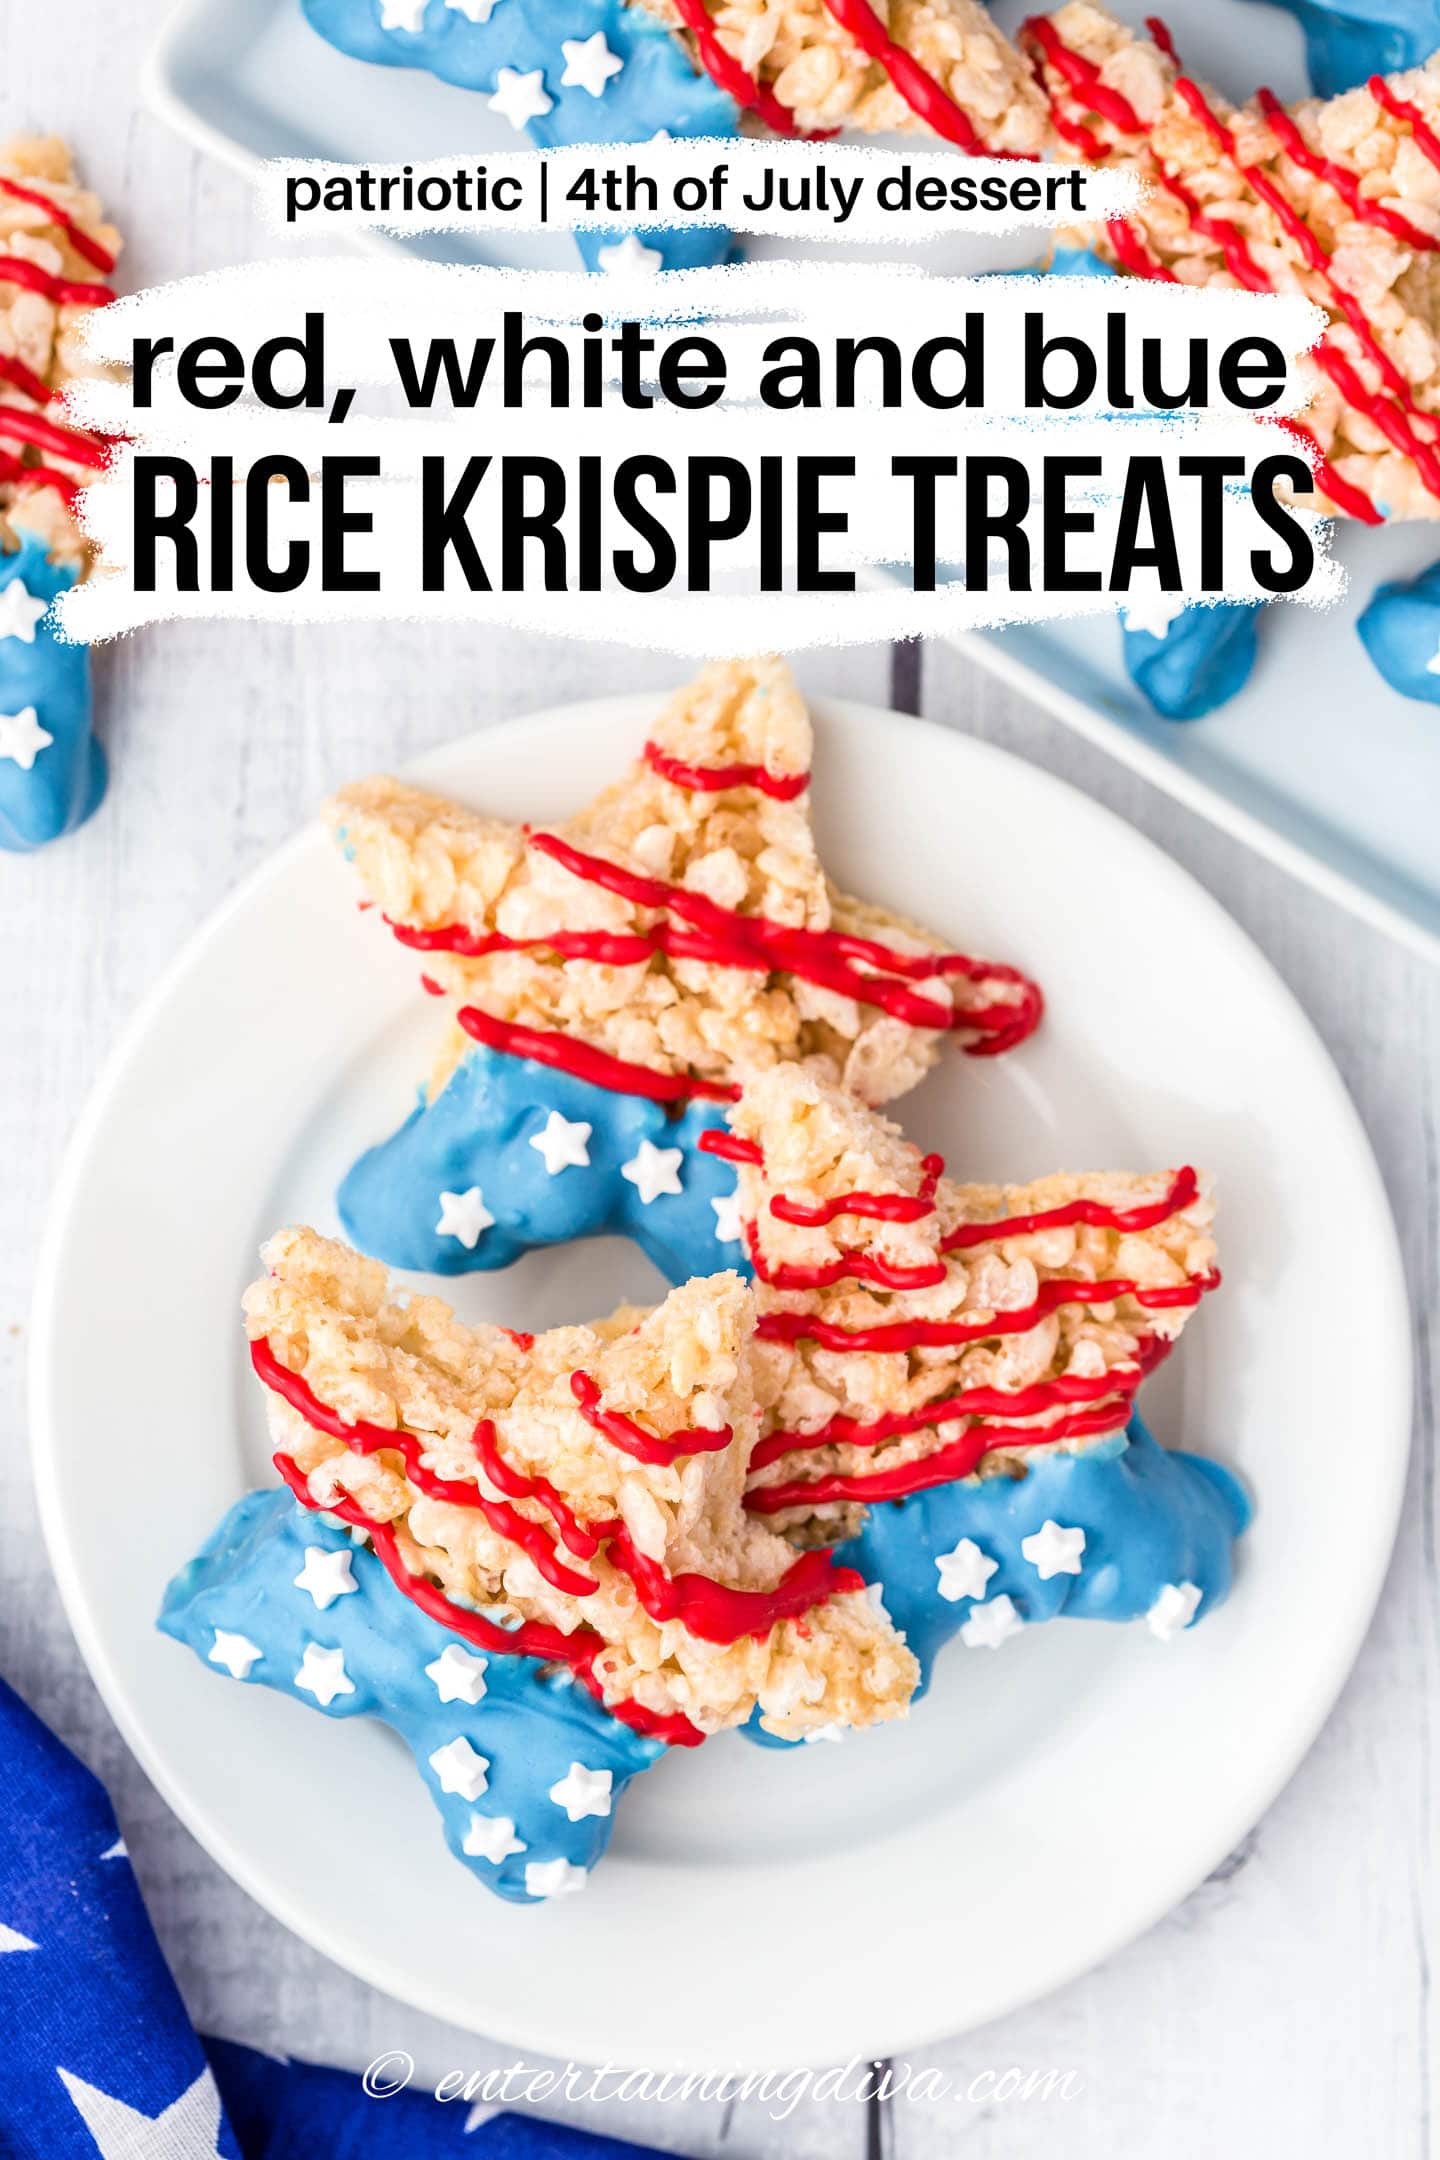 Patriotic 4th of July red, white and blue Rice Krispie treats